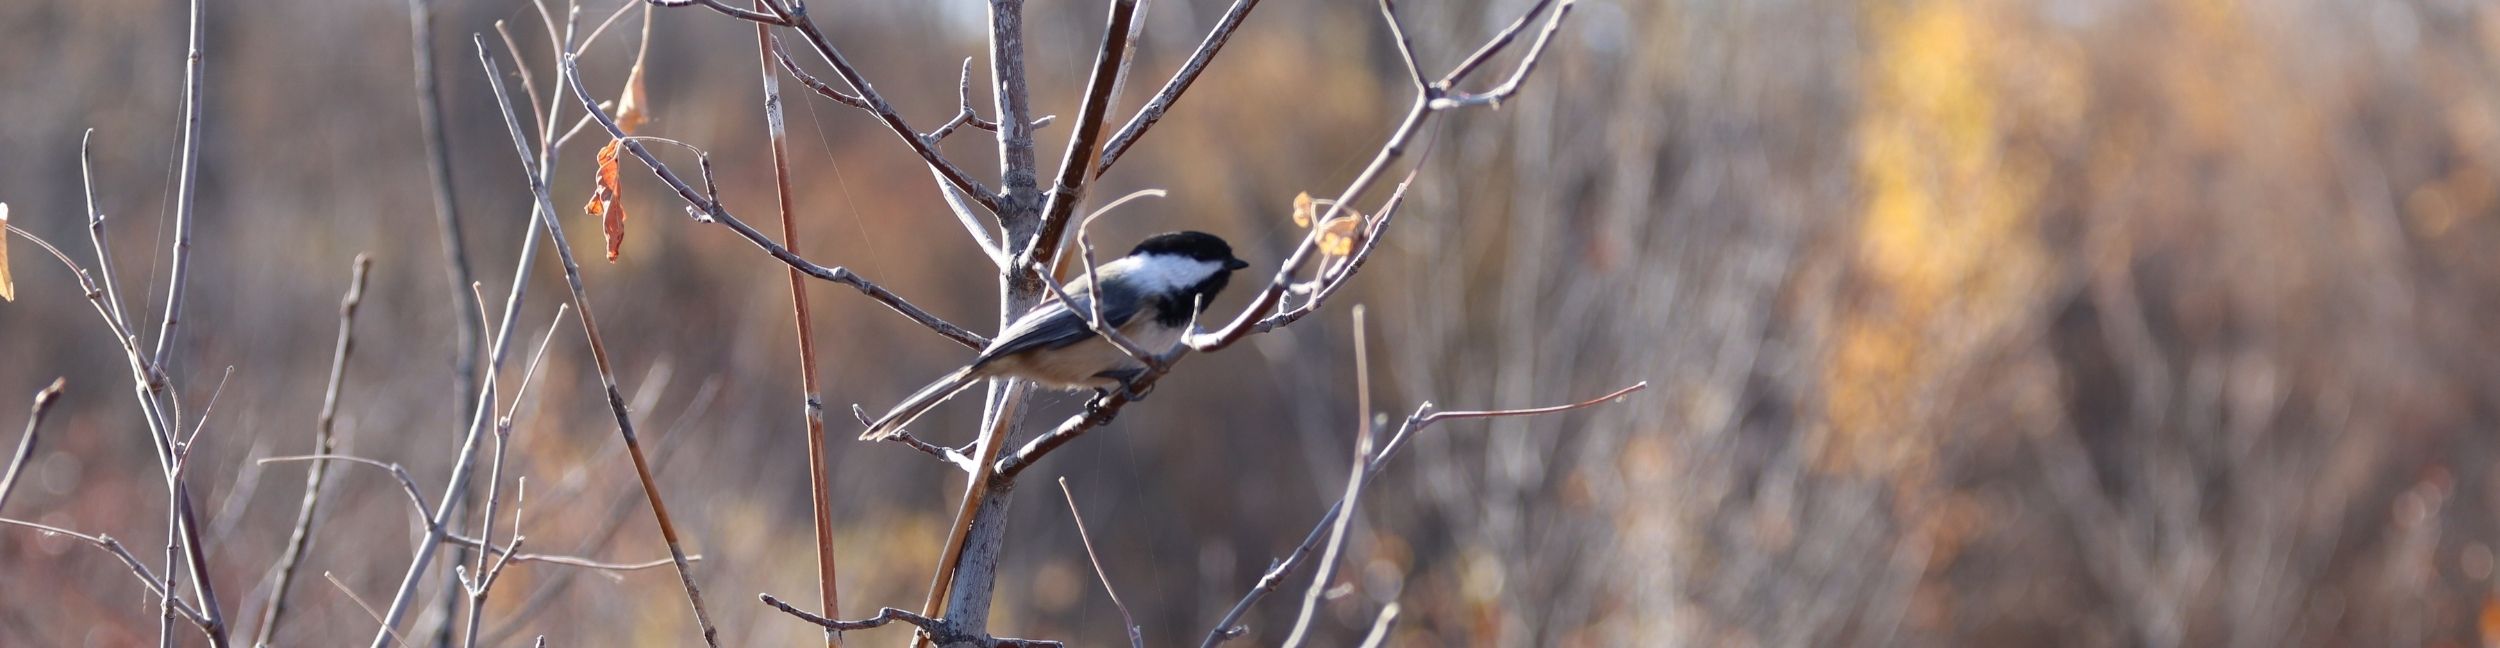 A chickadee gets ready to fly at Beaver Creek Meewasin